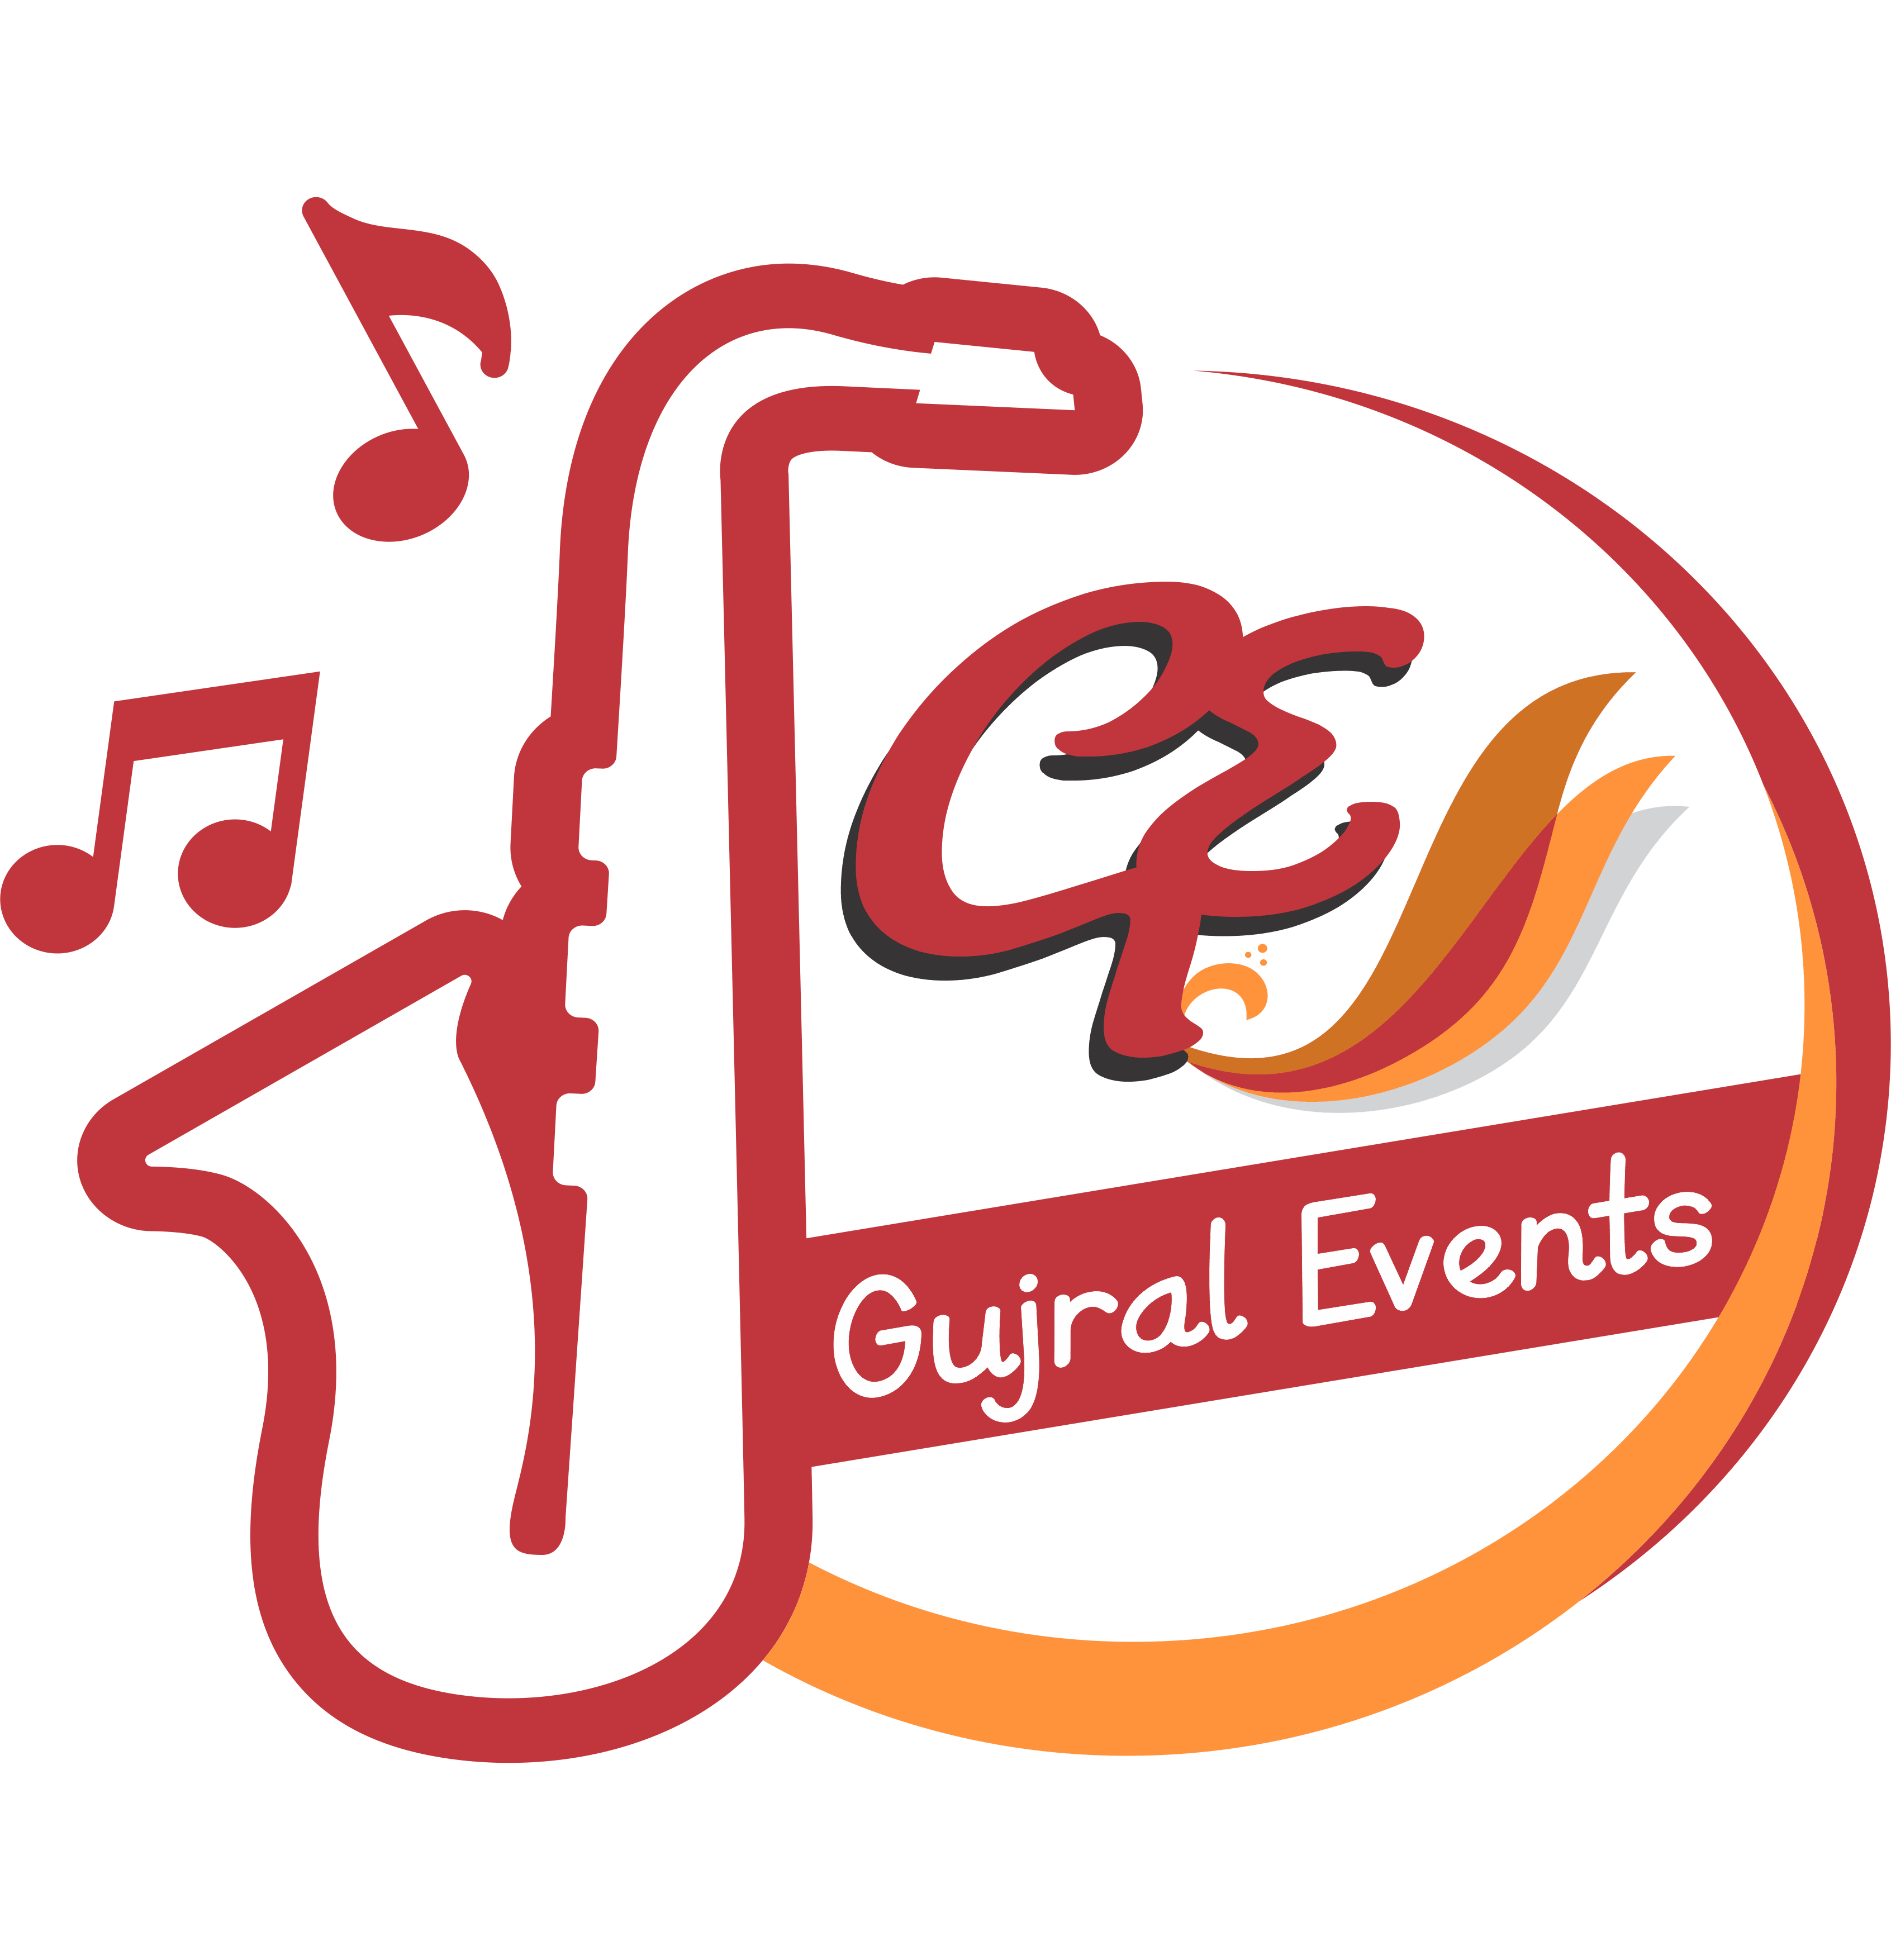 Gujral Events